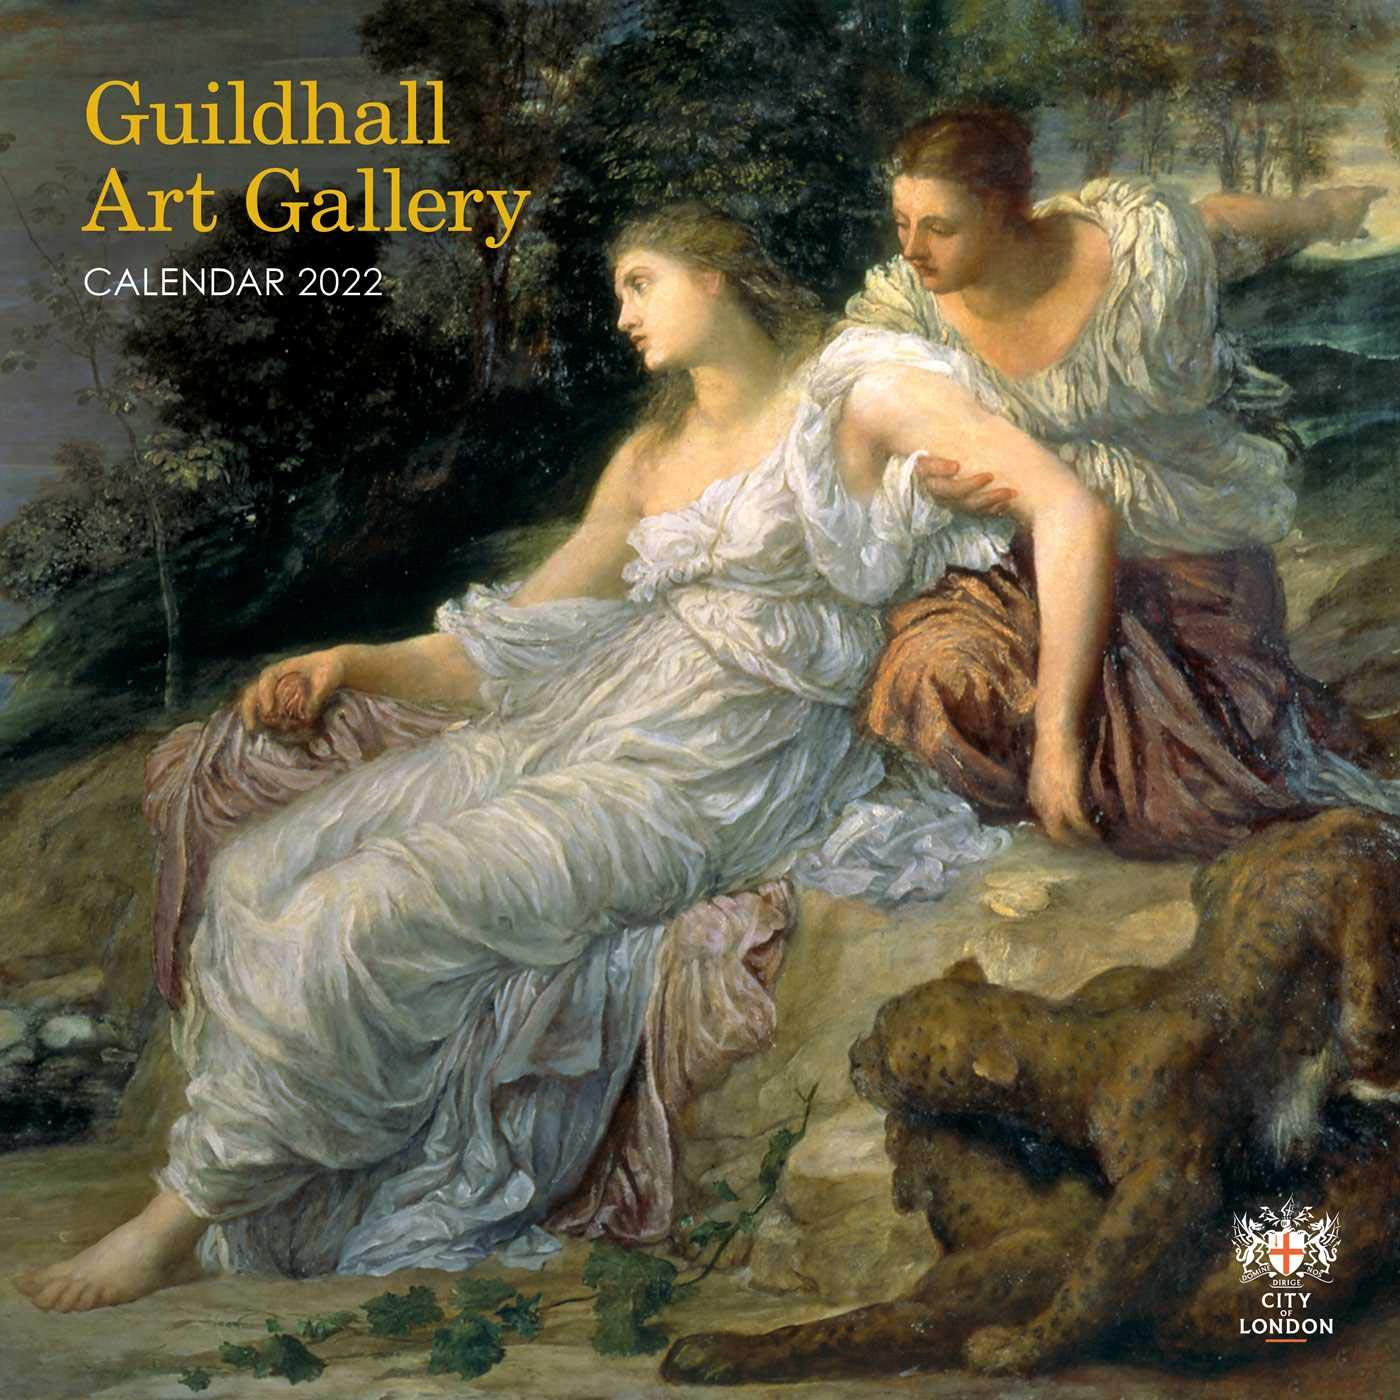 Calendar 2022 - Guildhall Art Gallery | Flame Tree Publishing